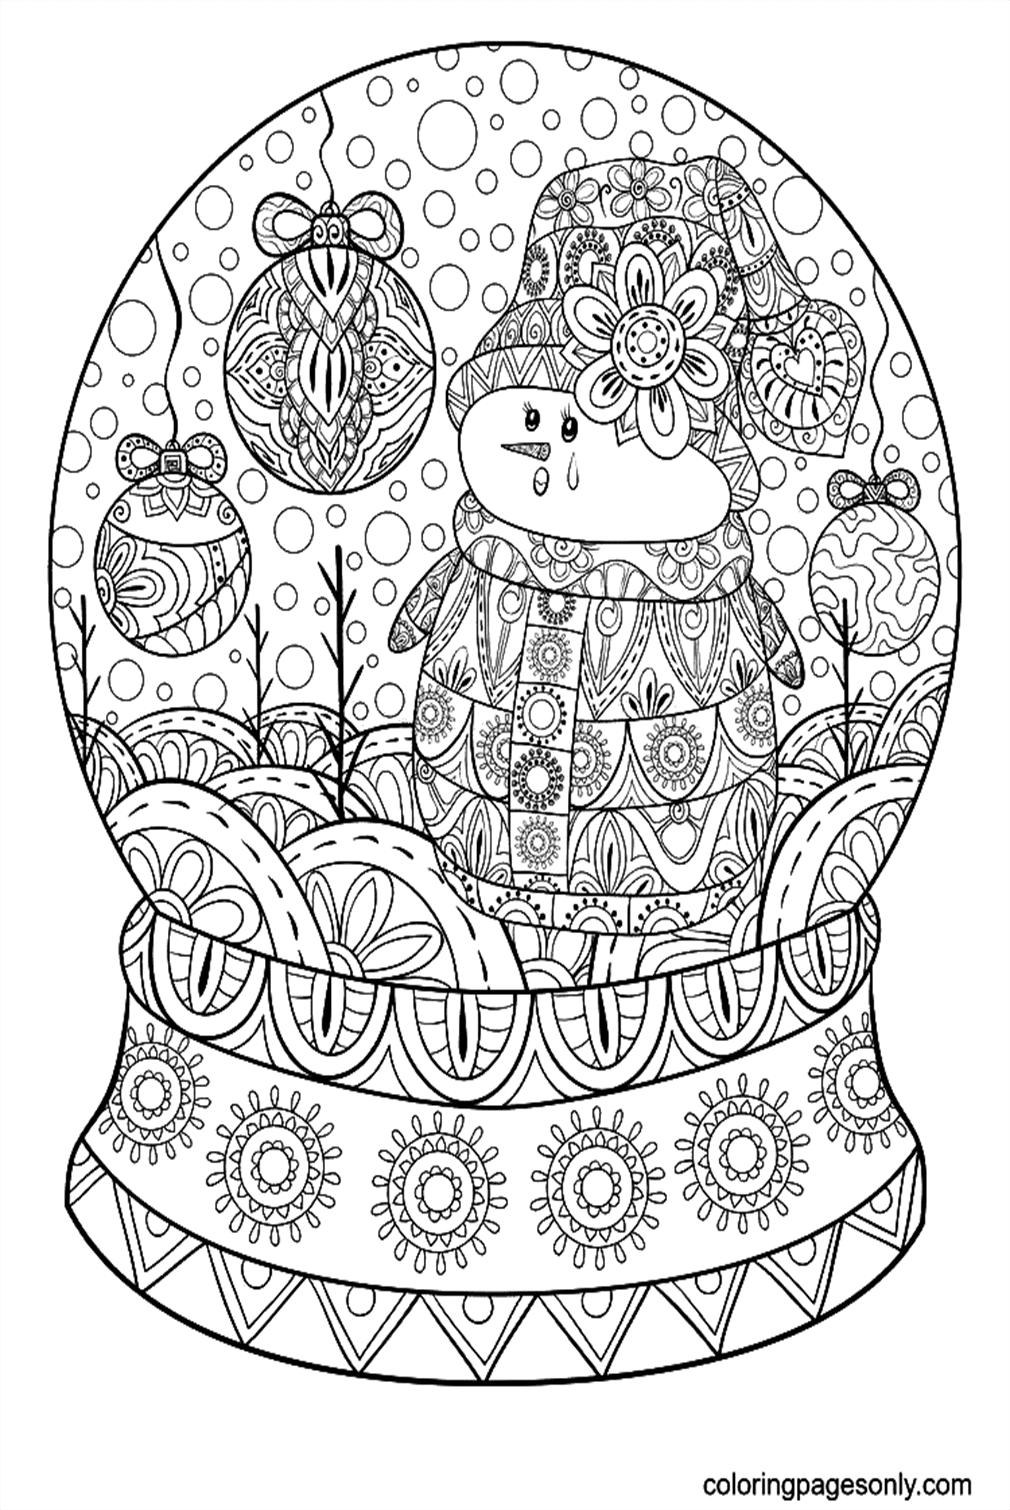 Cute Christmas Globe with Snowman Coloring Pages